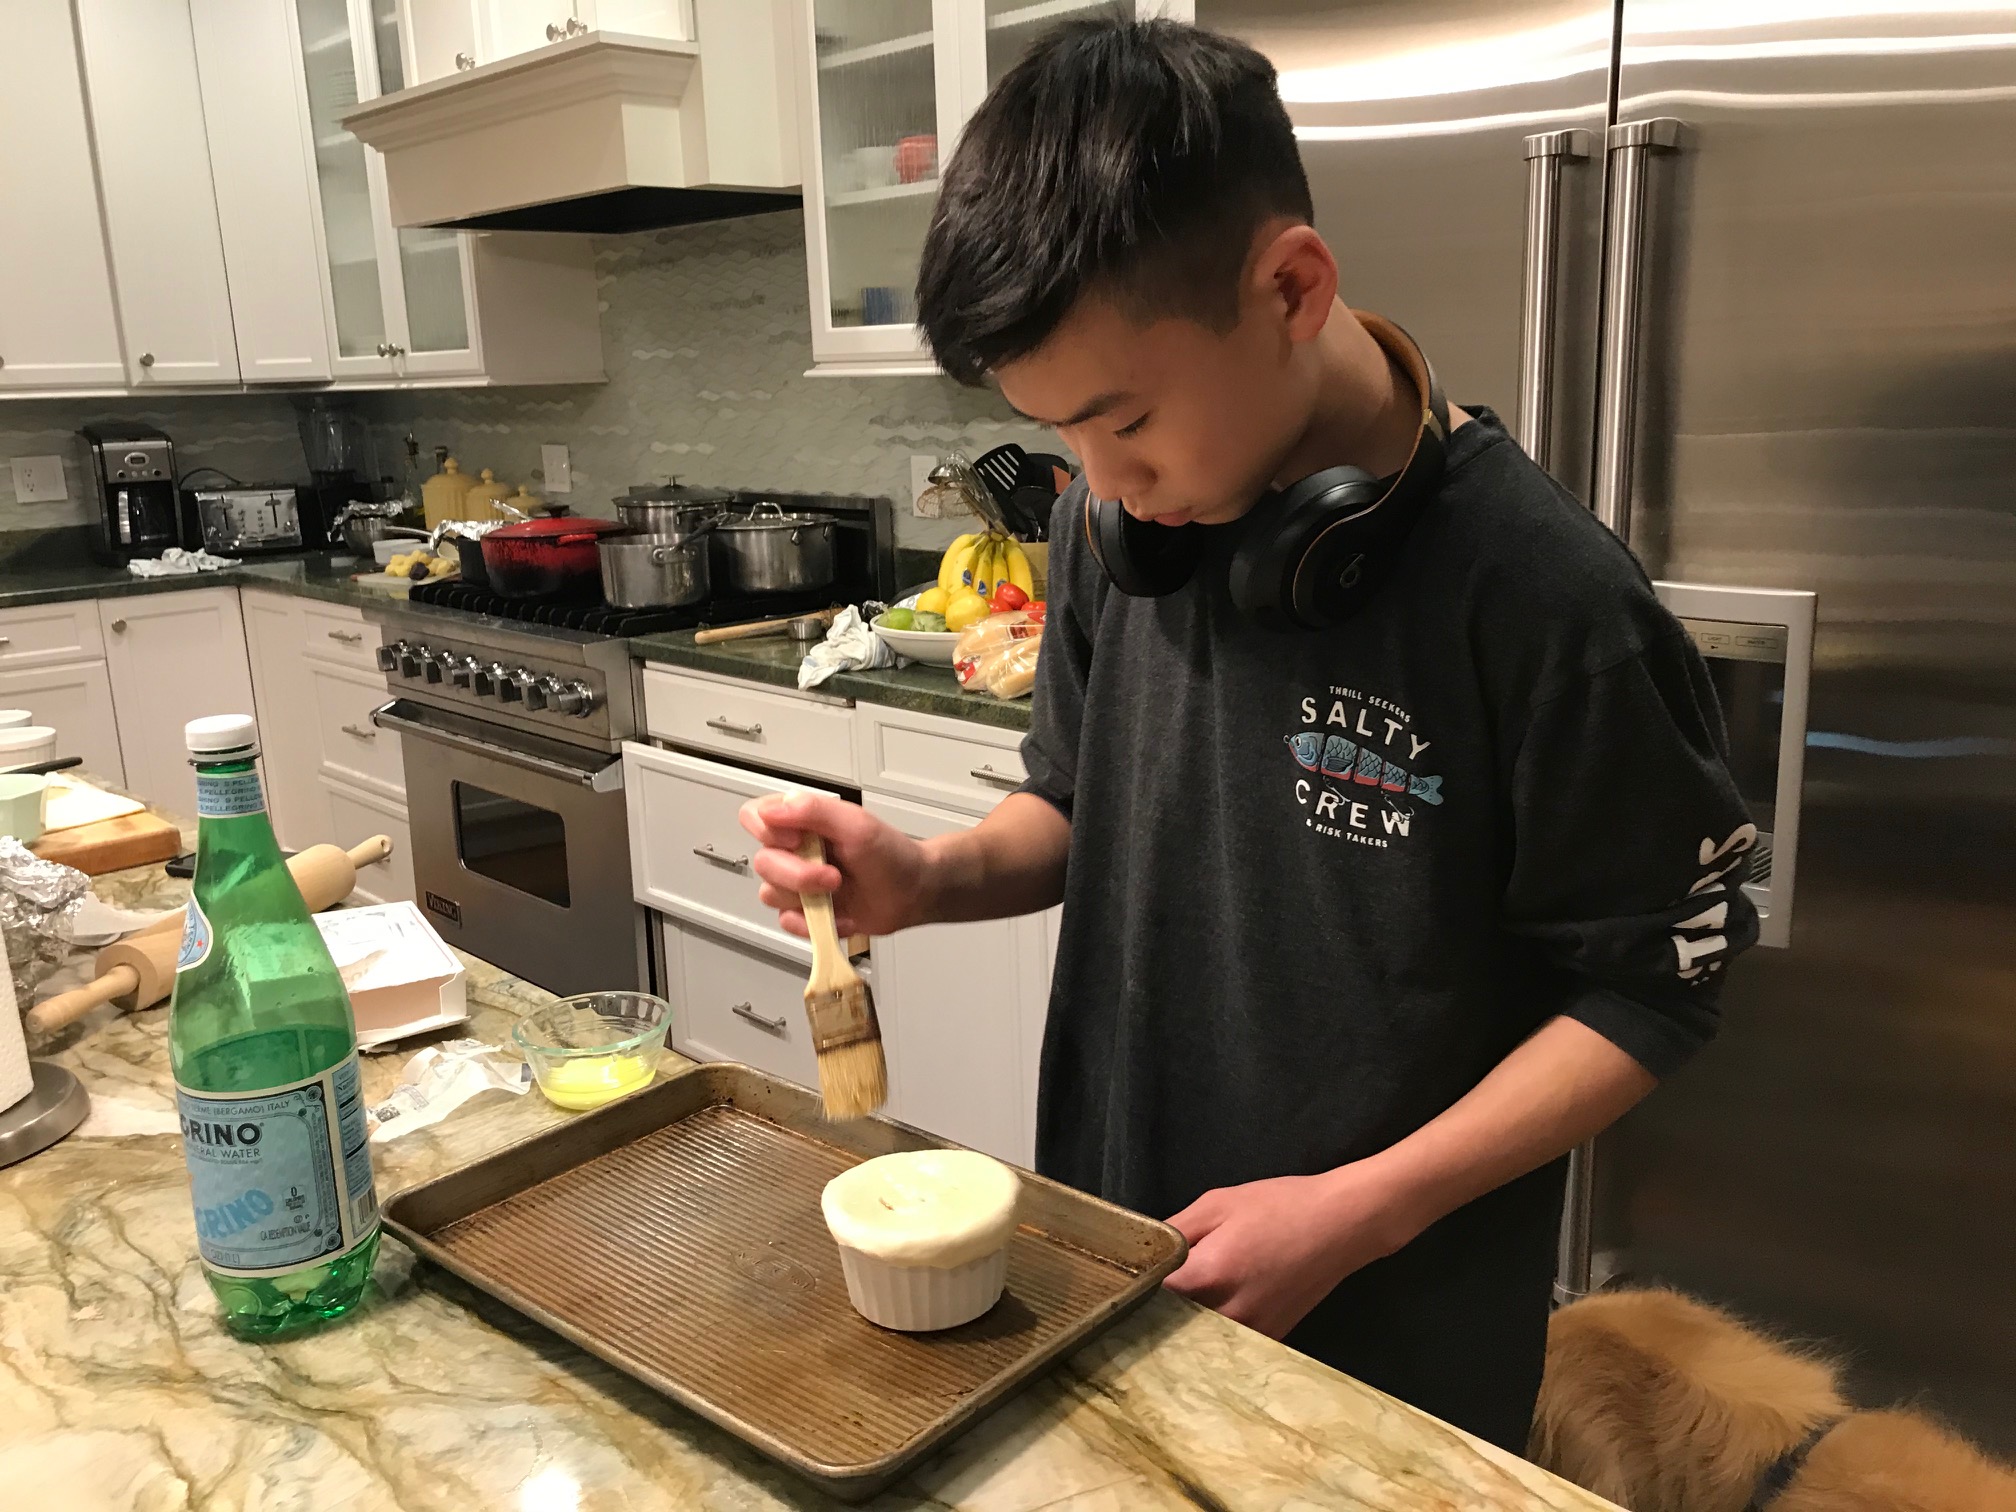 My son cooking and cook books for kids